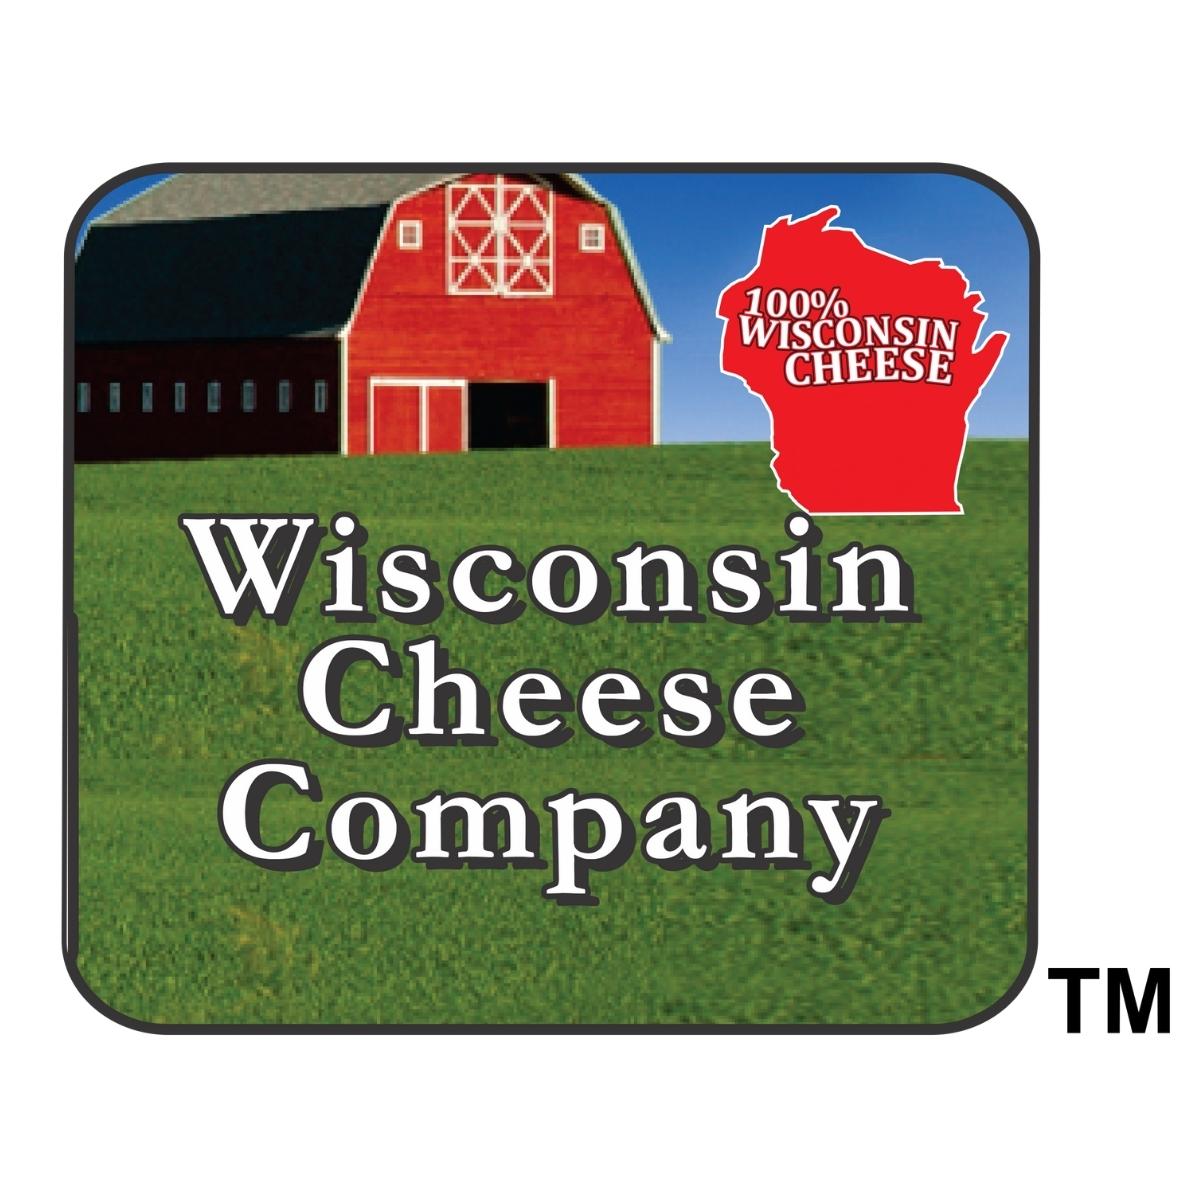 Wisconsin Specialty Gourmet Cheese Assortment & Cracker Gift Box, Perfect Cheese Gift, A Great Gift for Birthdays or Mother's Day.